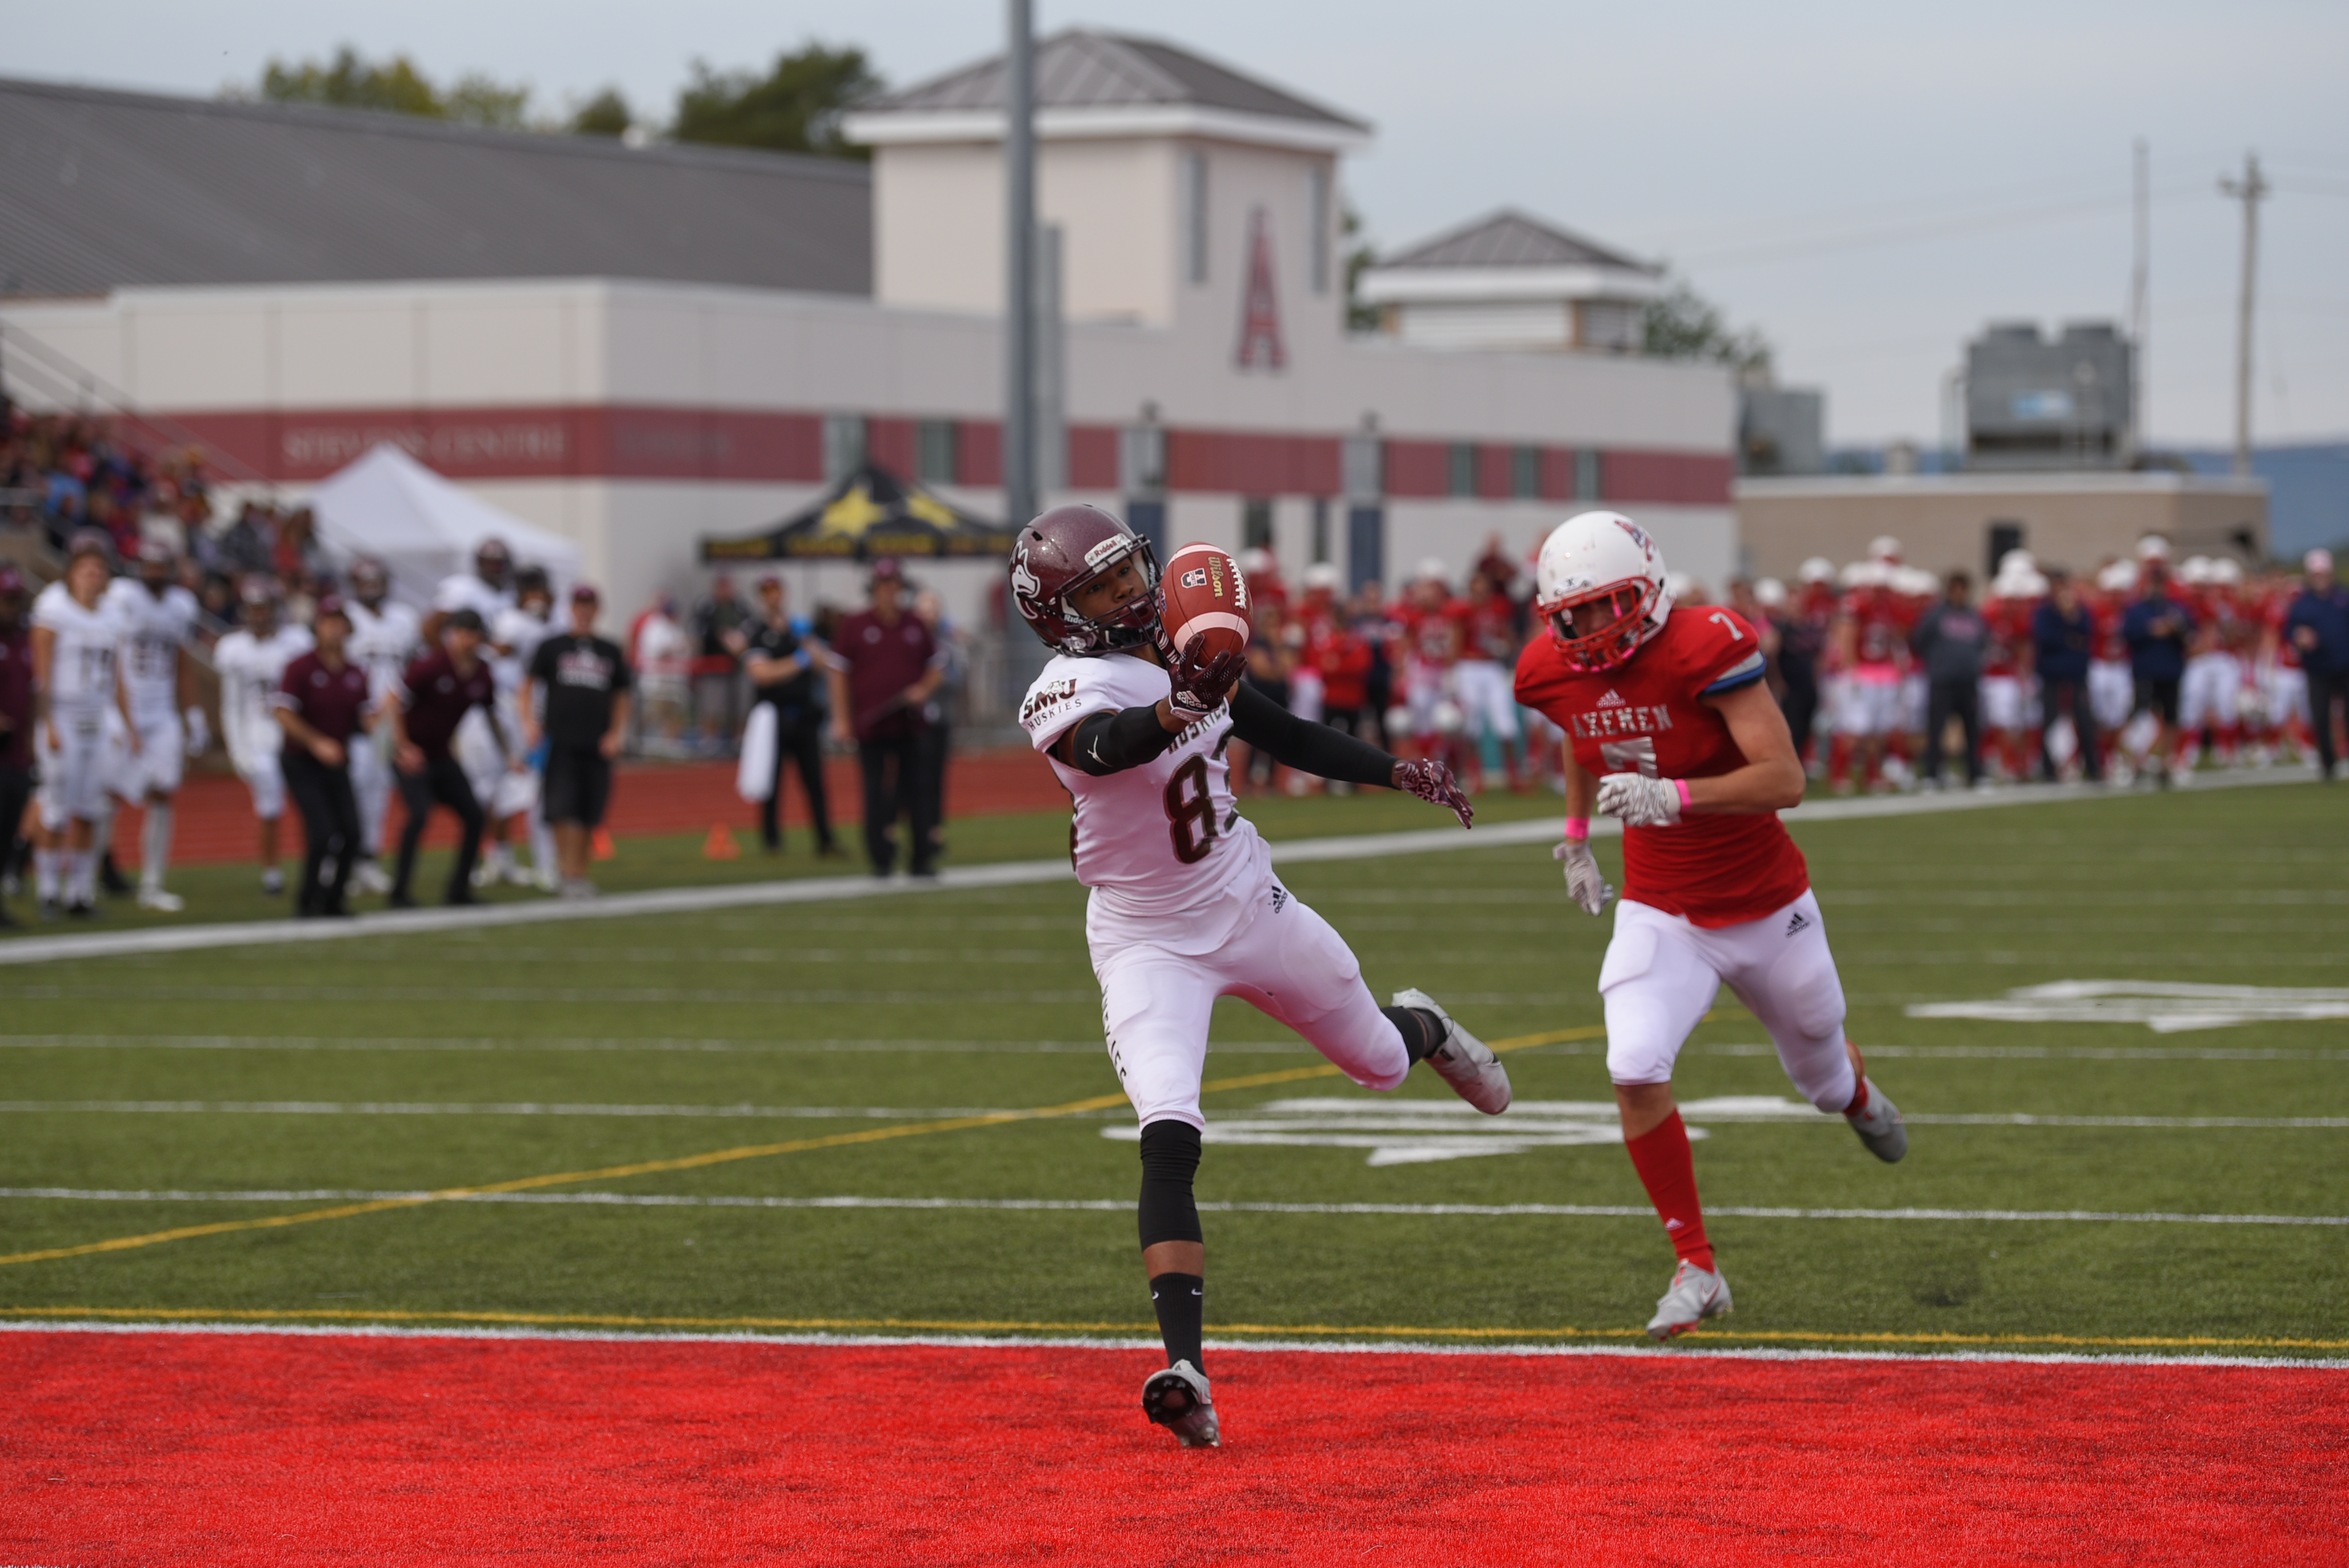 Huskies wide receiver Trydell Mintis (#83) makes a spectacular touchdown catch in the second quarter of the Huskies 25-22 win over the Acadia Axemen on Oct. 1, 2022 (Photo courtesy: Peter Oleskevich / Acadia Athletics)